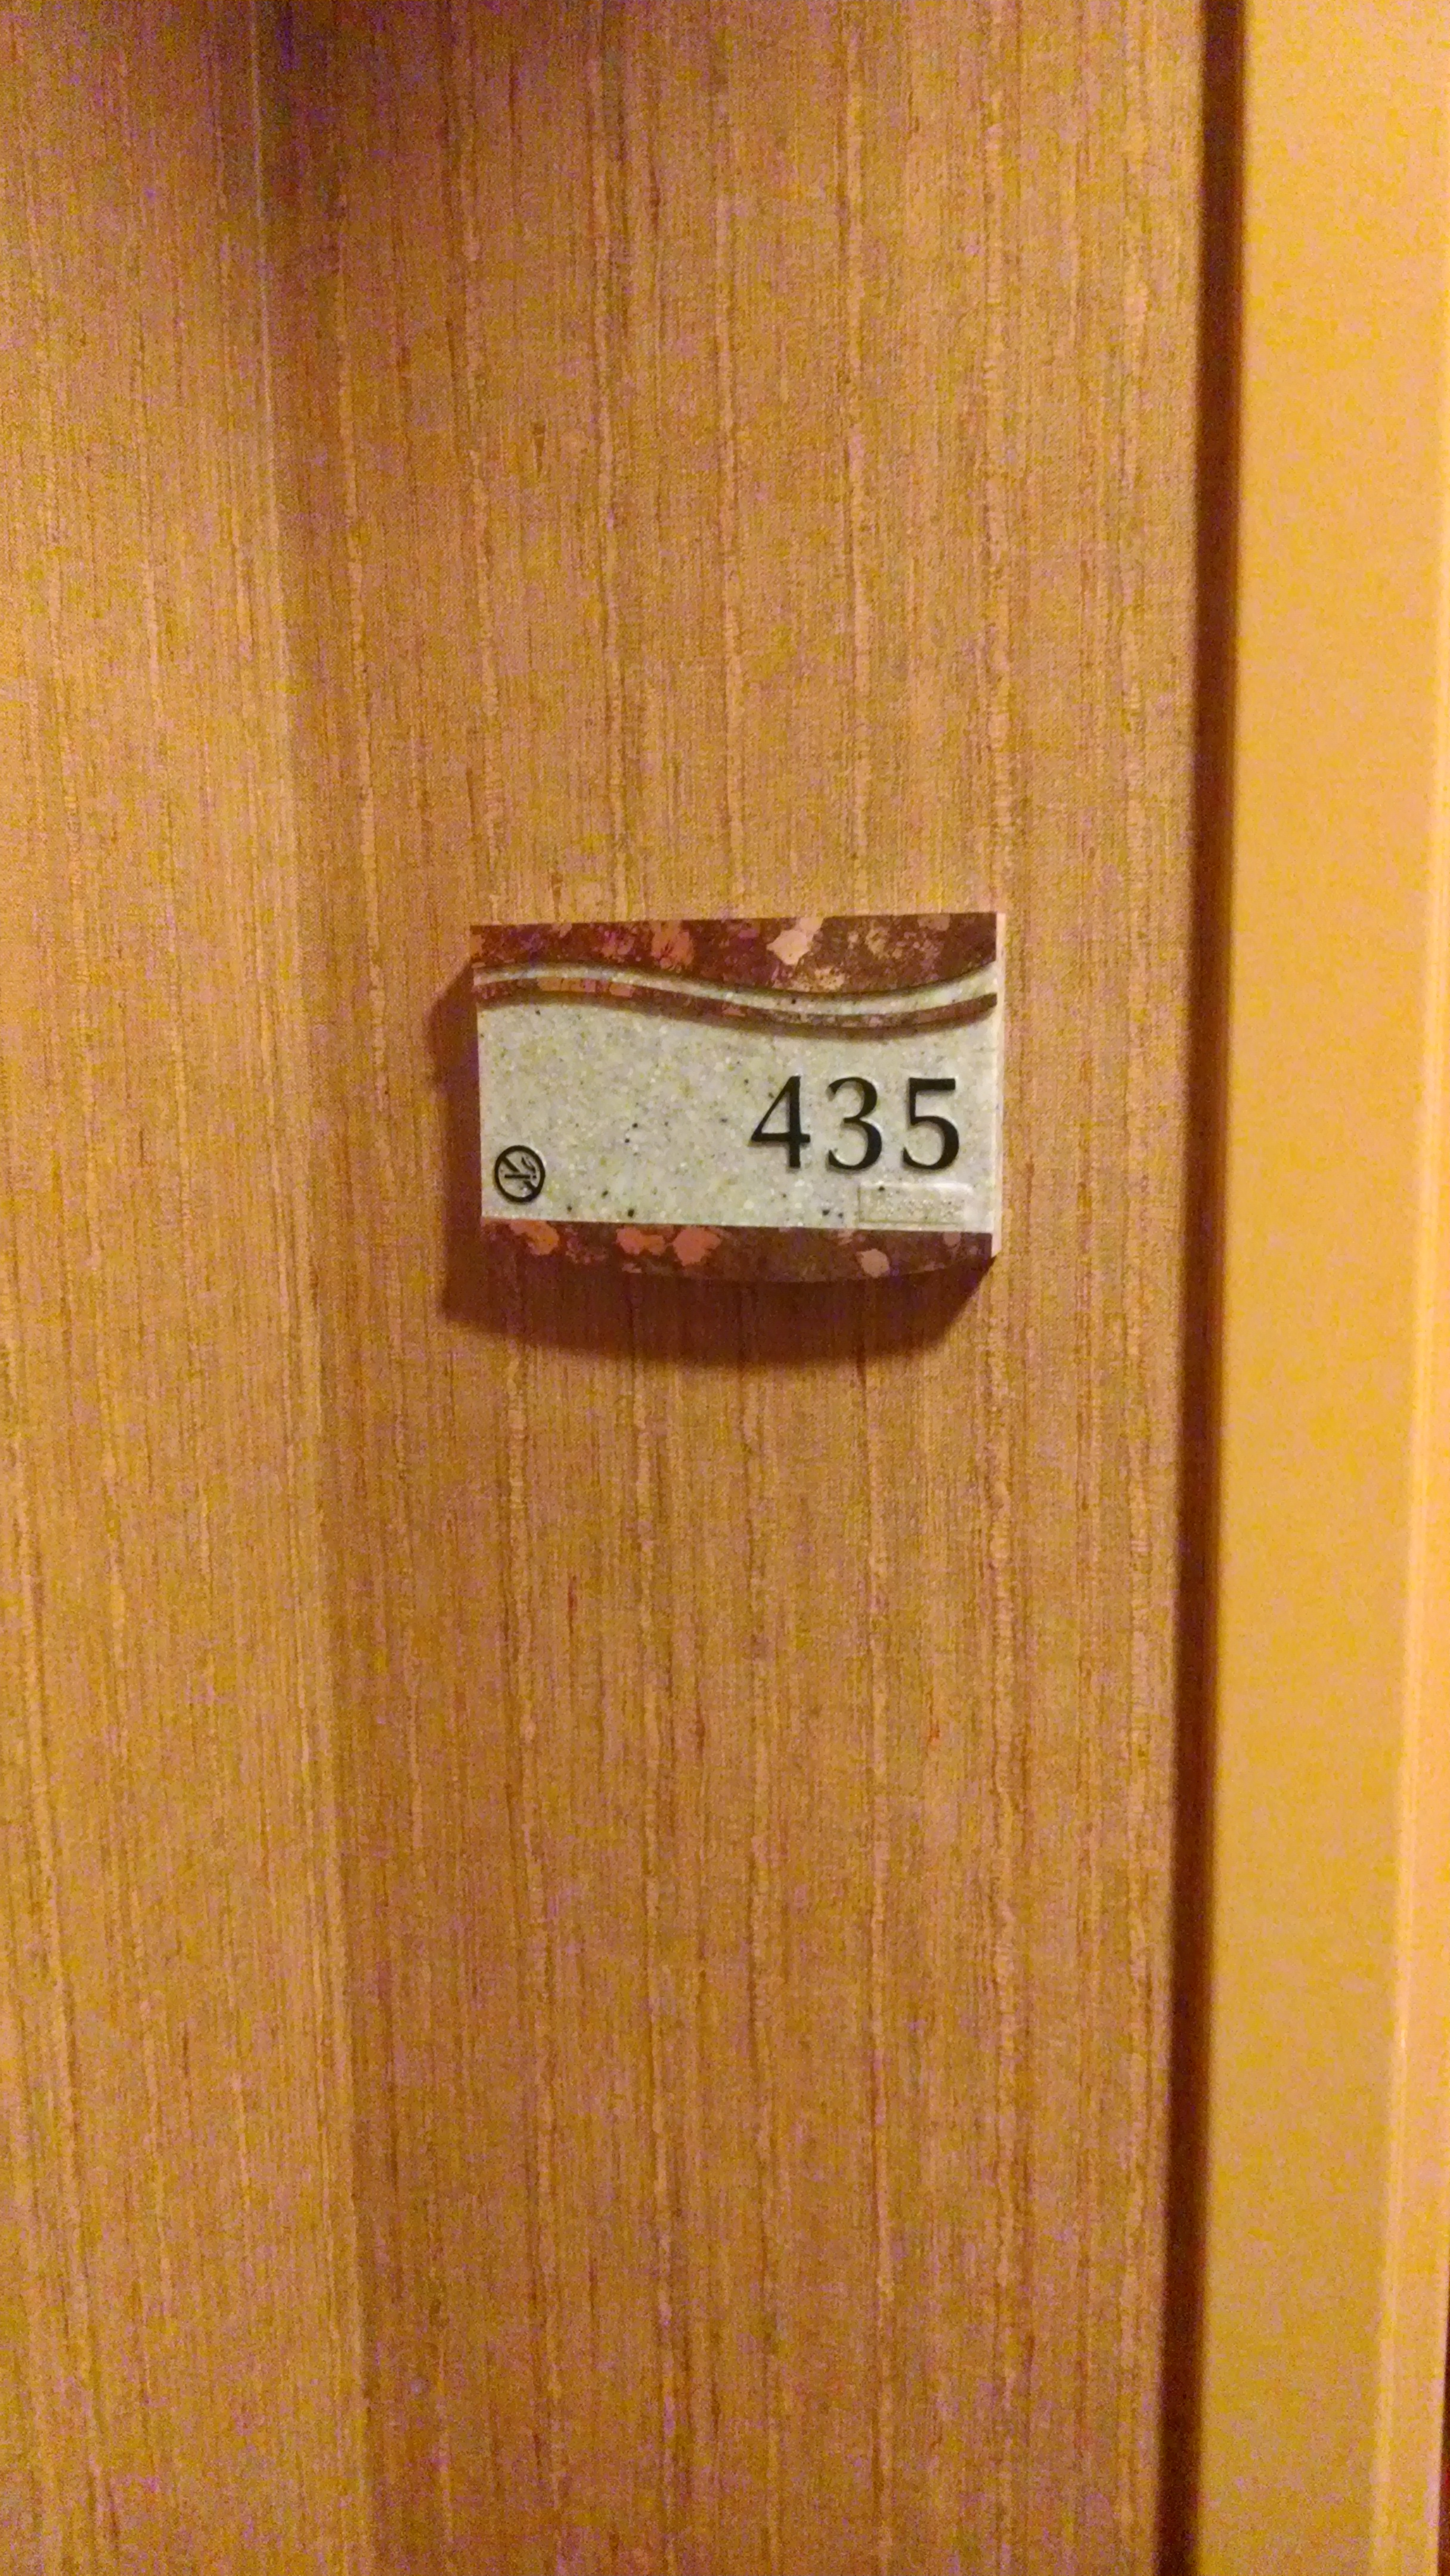 Picture of hotel room number sign